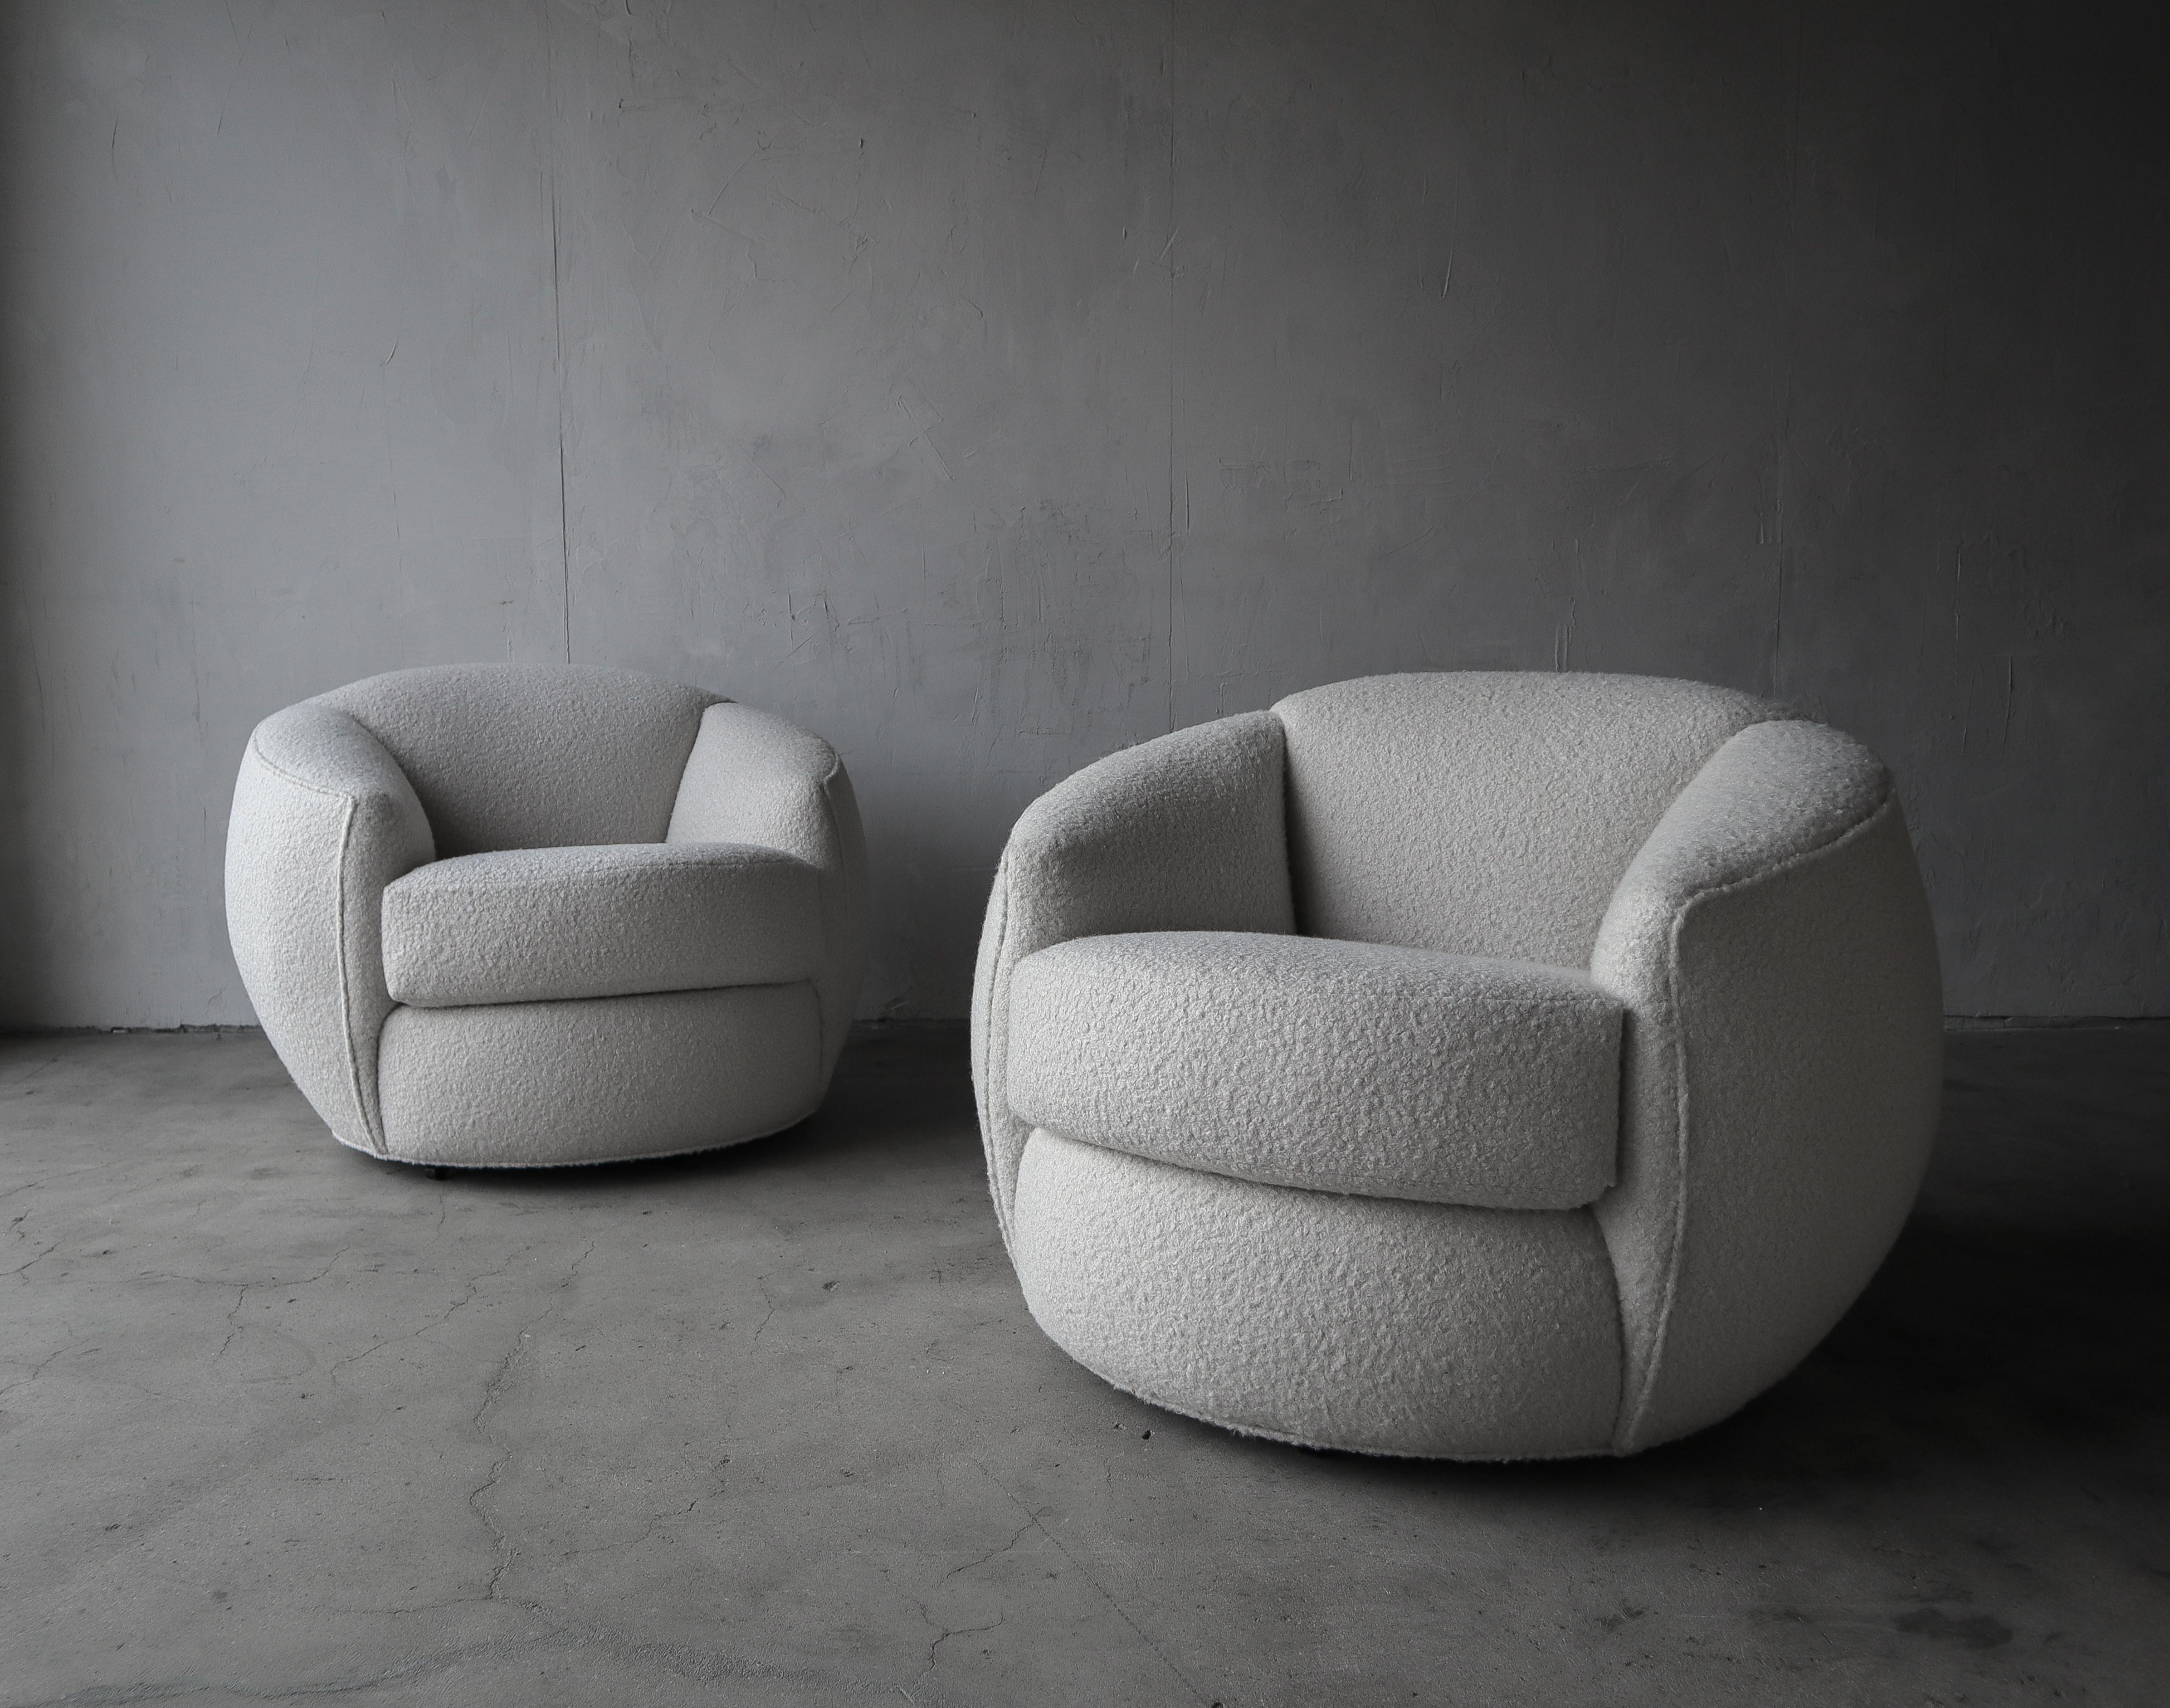 Pictures do not do these justice. This is a truly gorgeous pair of Post Modern ball chairs that have been modernized with all new off white bouclé fabric and new foam. They are quite large however the femininity of their shape adds to their appeal,